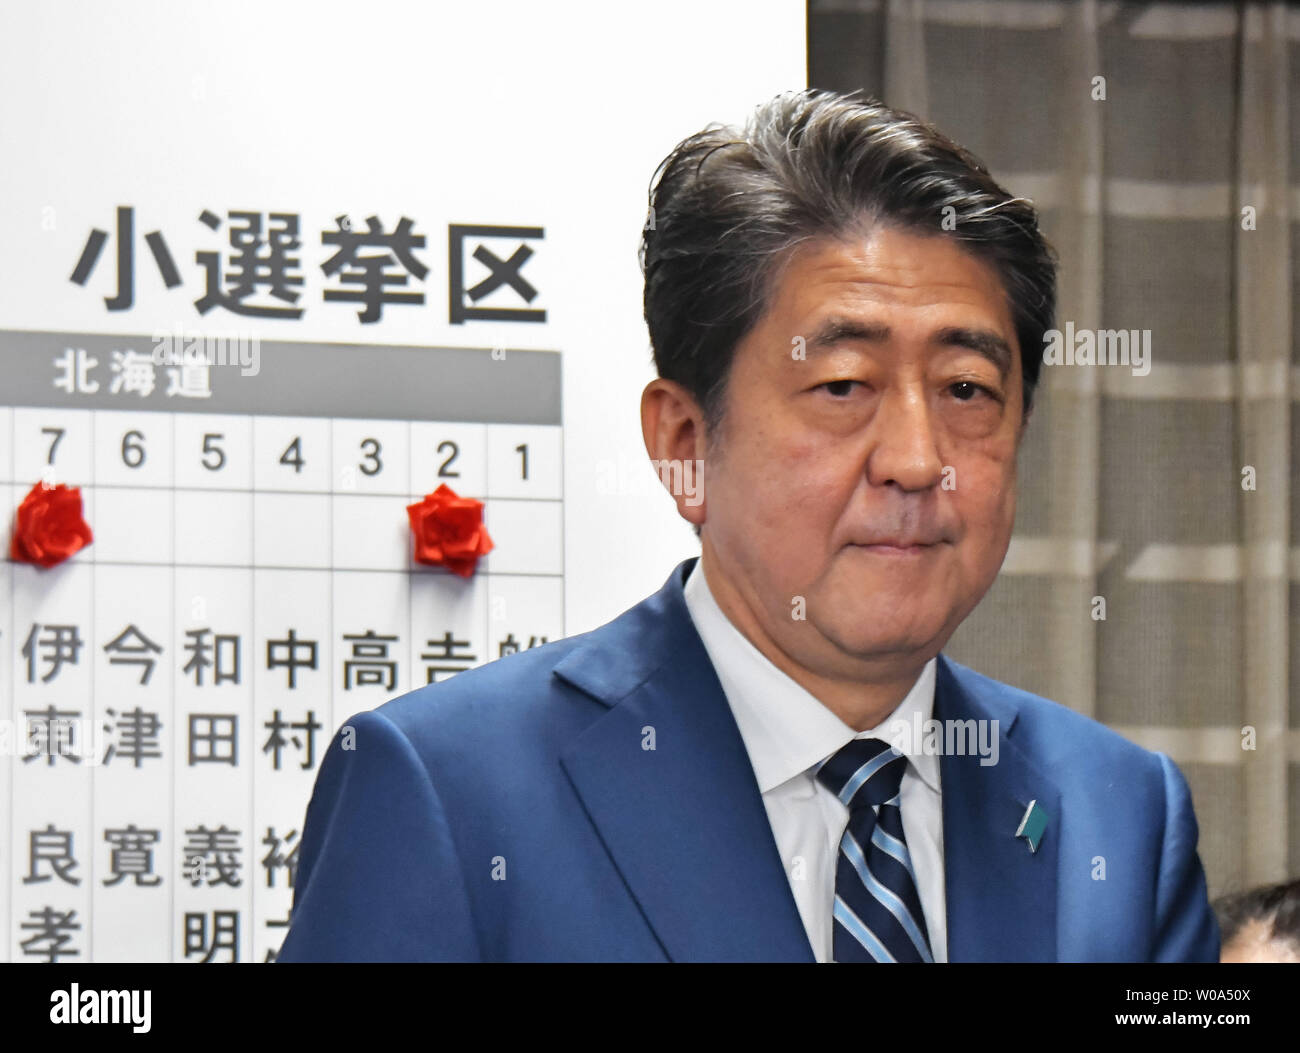 Shinzo Abe, President of Liberal Democratic Party of Japan, attends the ballot counting ceremony for the parliamentary lower house elections in Tokyo, Japan, on October 22, 2017.     Photo by Keizo Mori/UPI Stock Photo